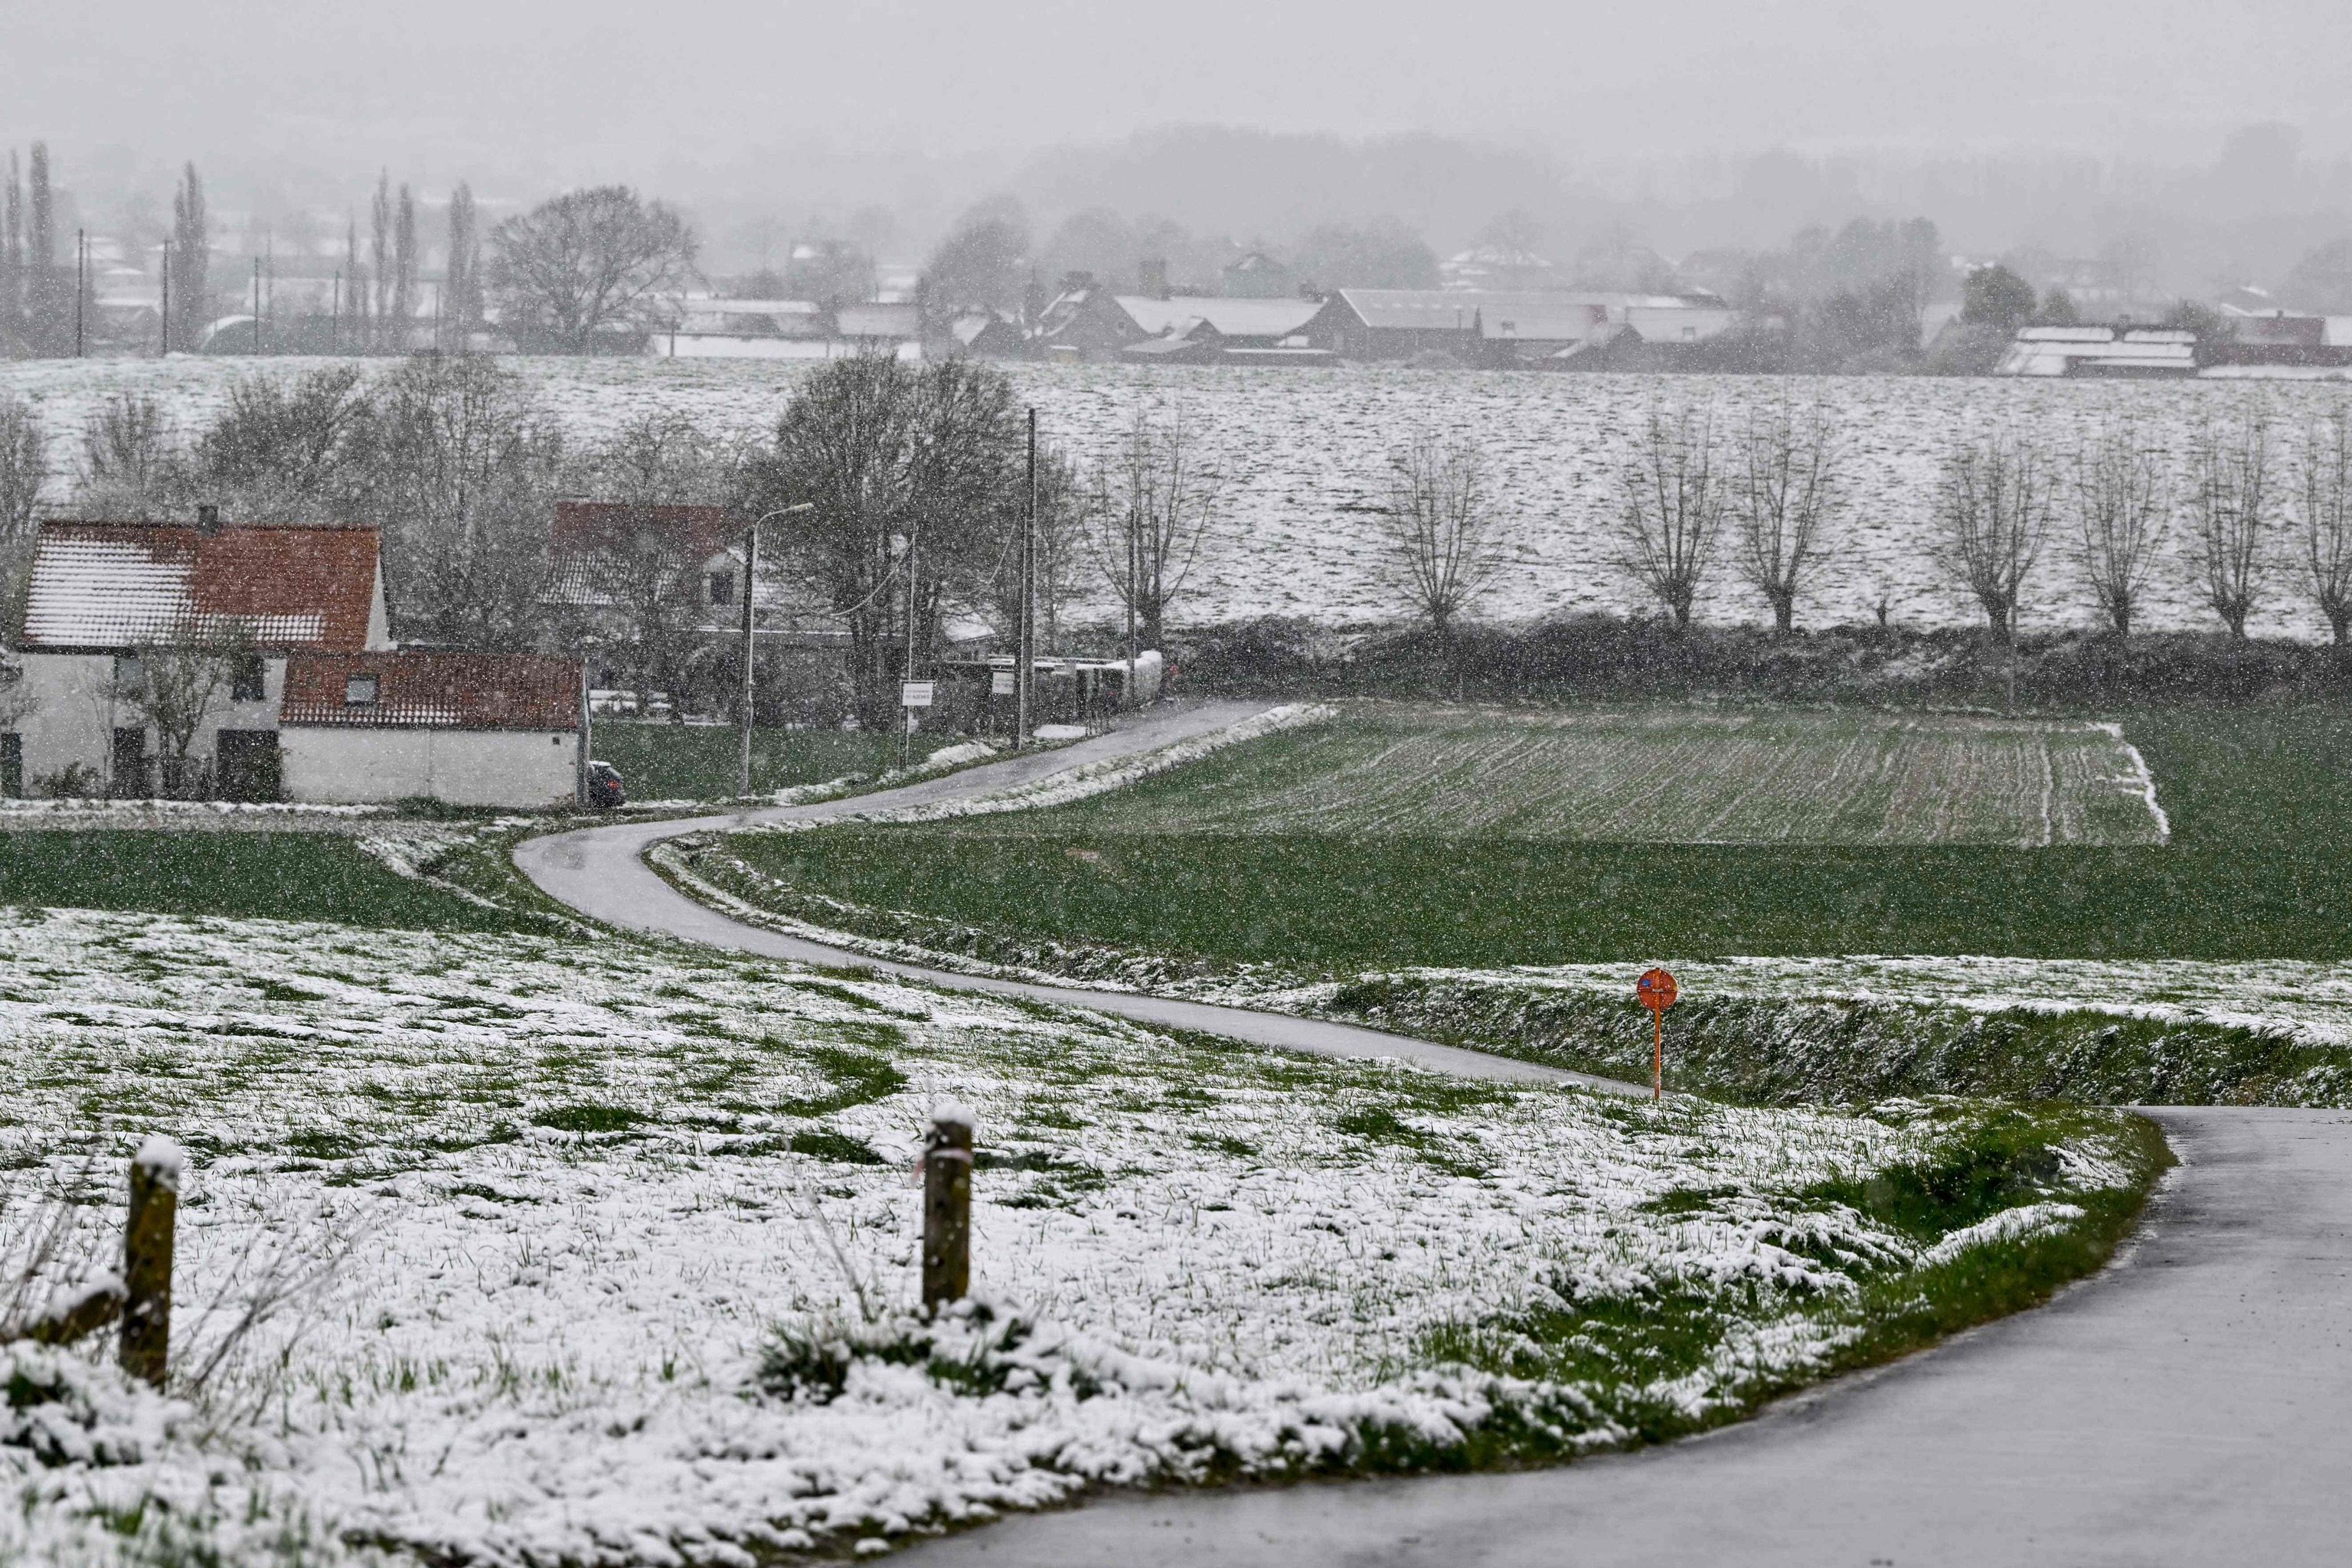 Snowy landscape on the Flanders route.